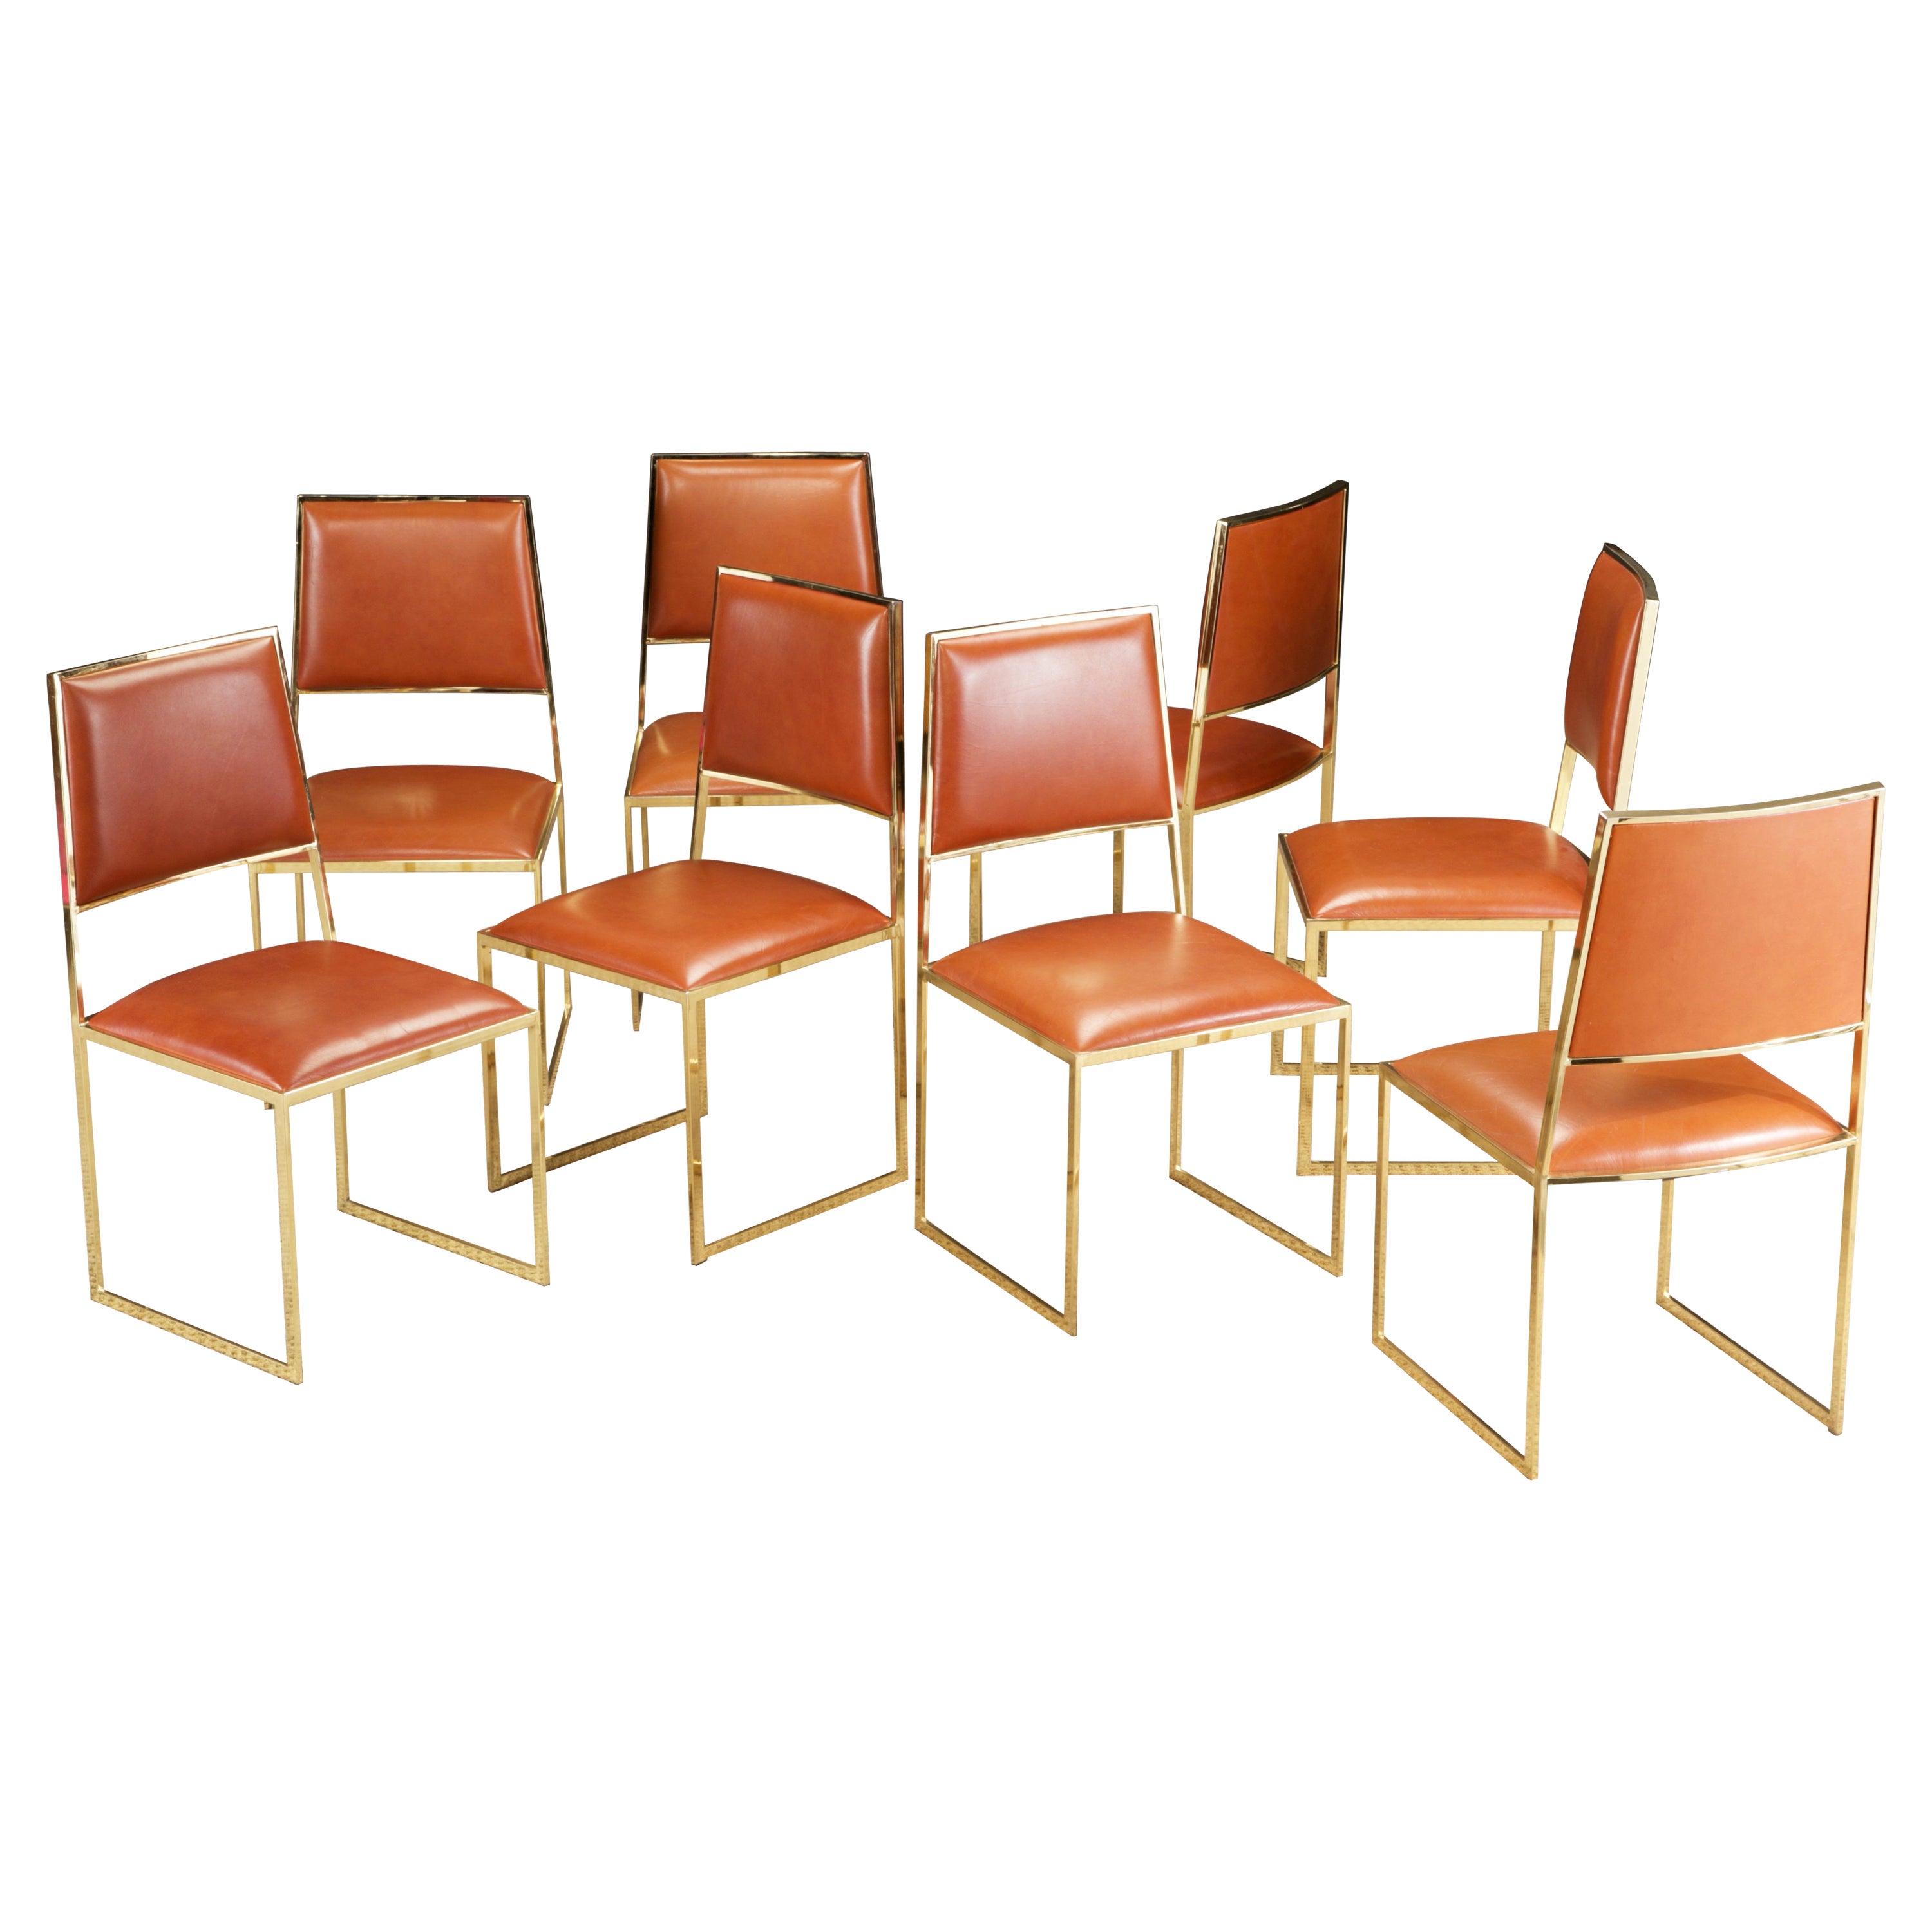 Willy Rizzo for Cidue Dining Chairs in Brass and Cognac Leather, c 1970, Signed